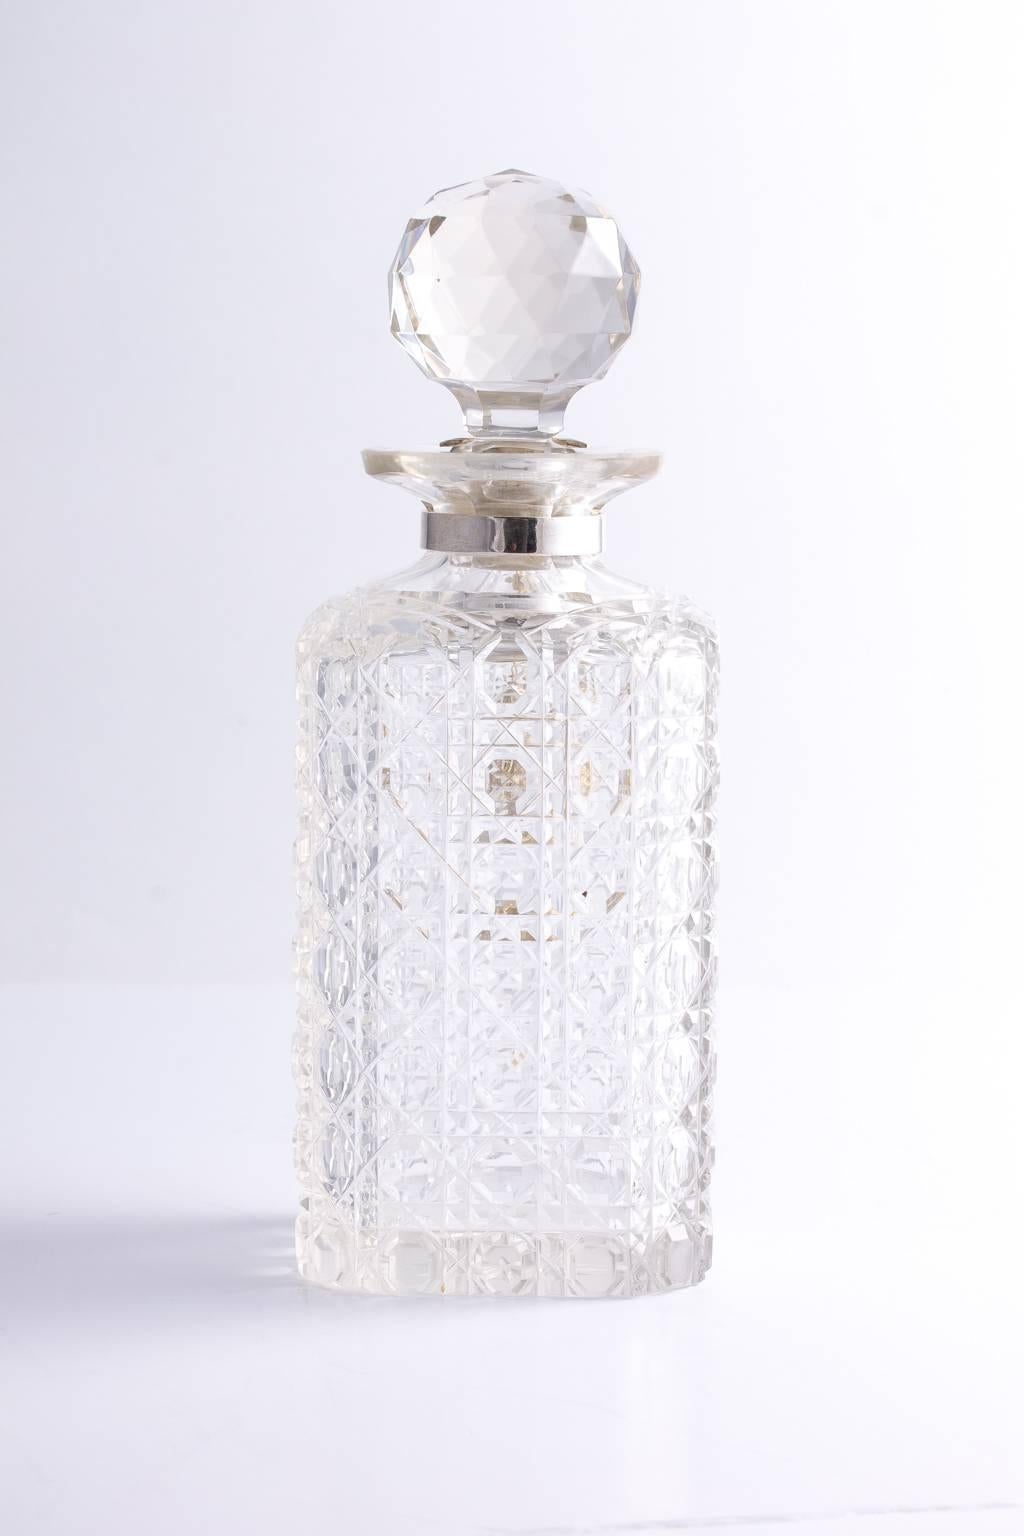 George Betjemann & Sons Patent Englsih cut crystal and silver decanter with lock, circa 1900s (working condition).